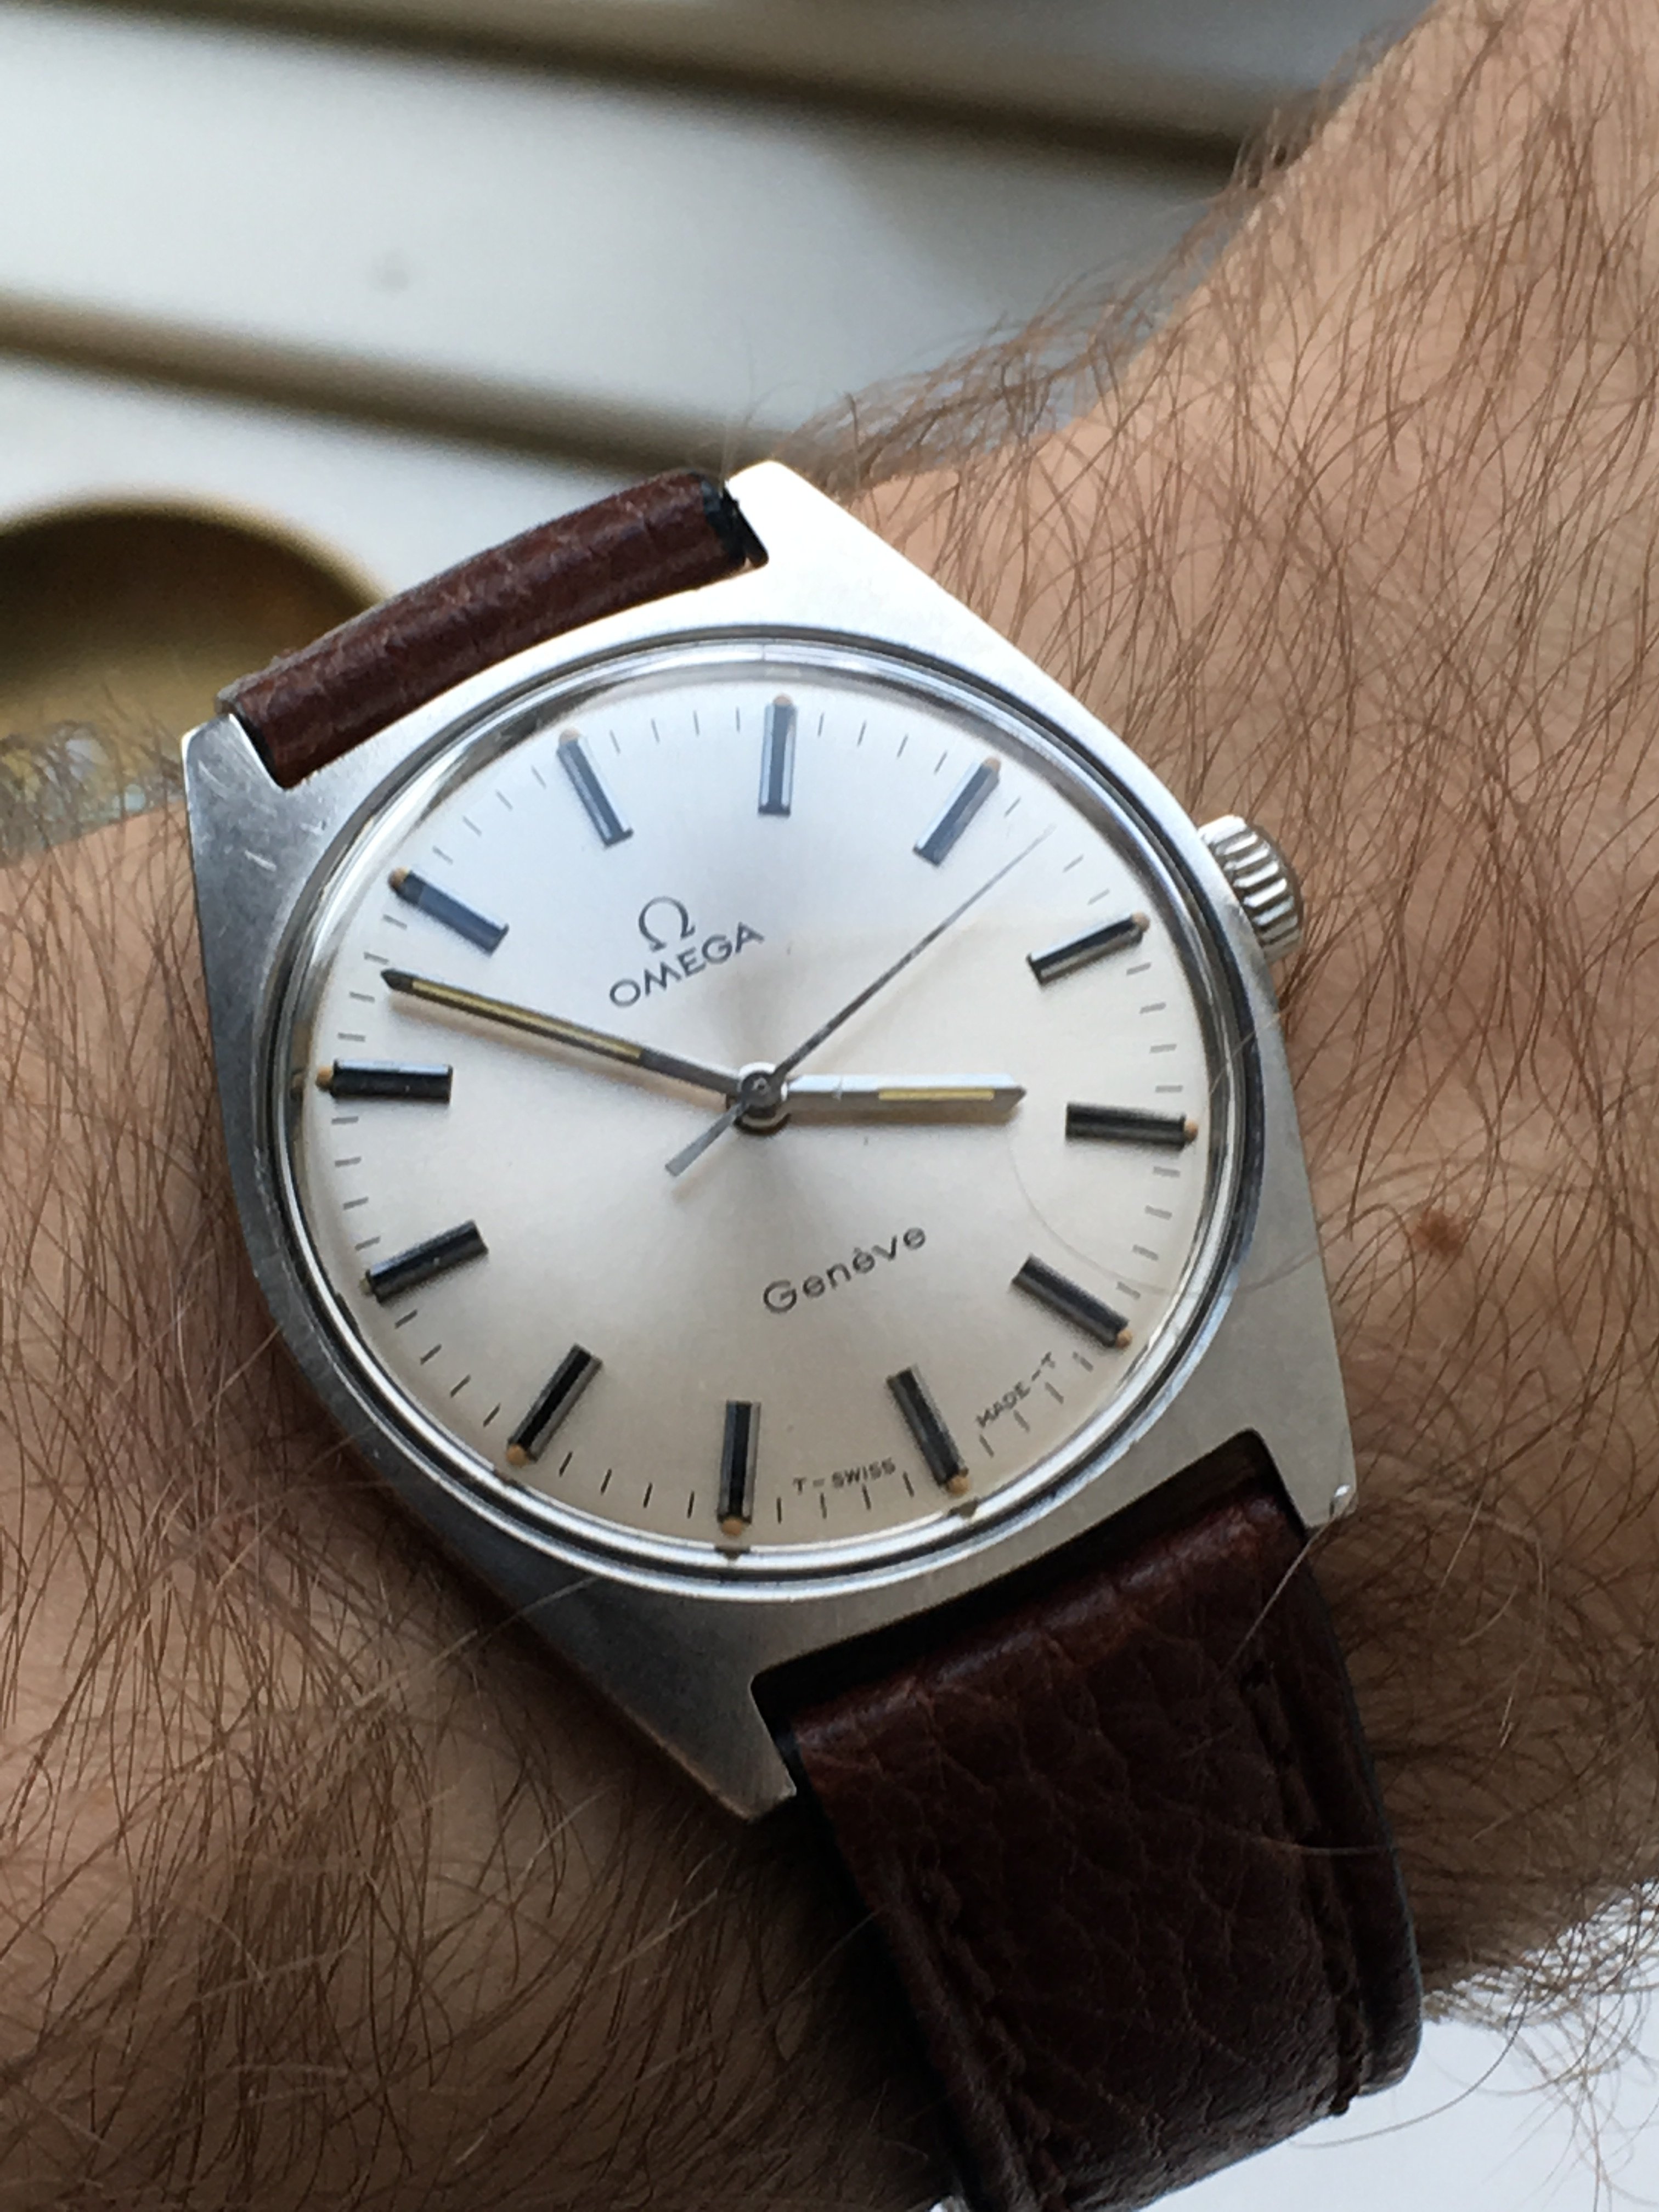 SOLD - Omega Genève (135.041) with 